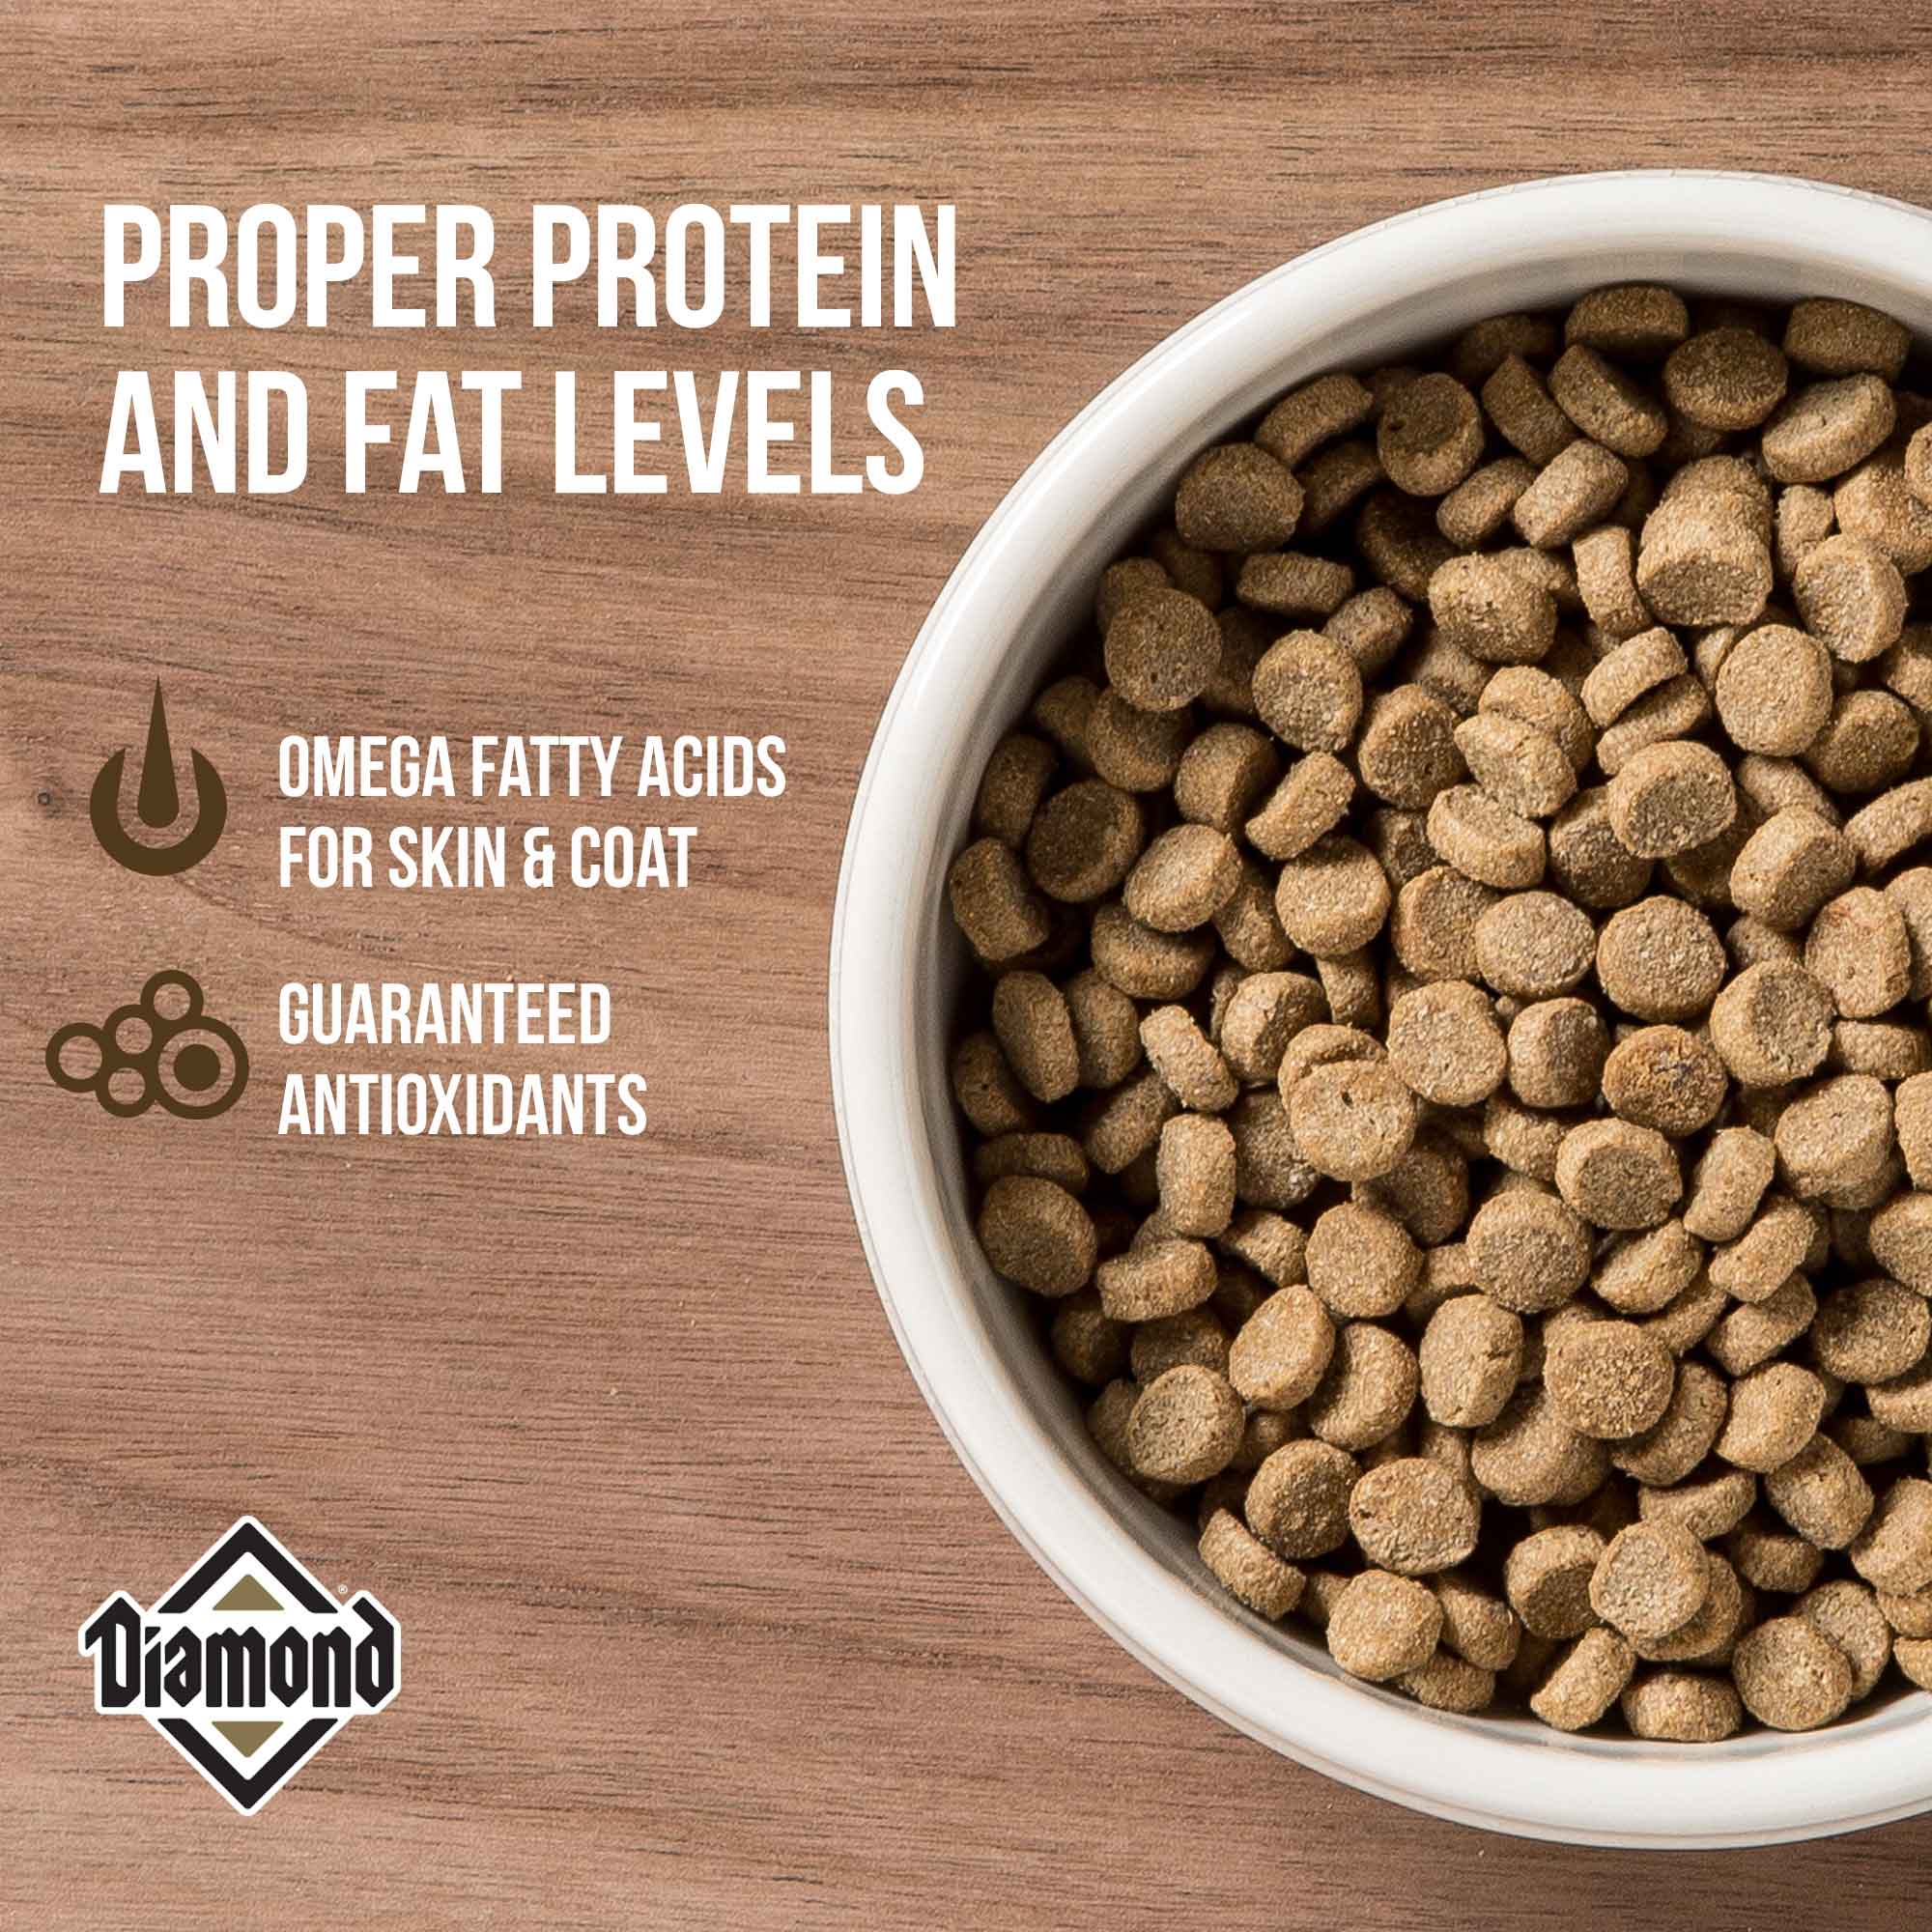 Proper protein and fat levels